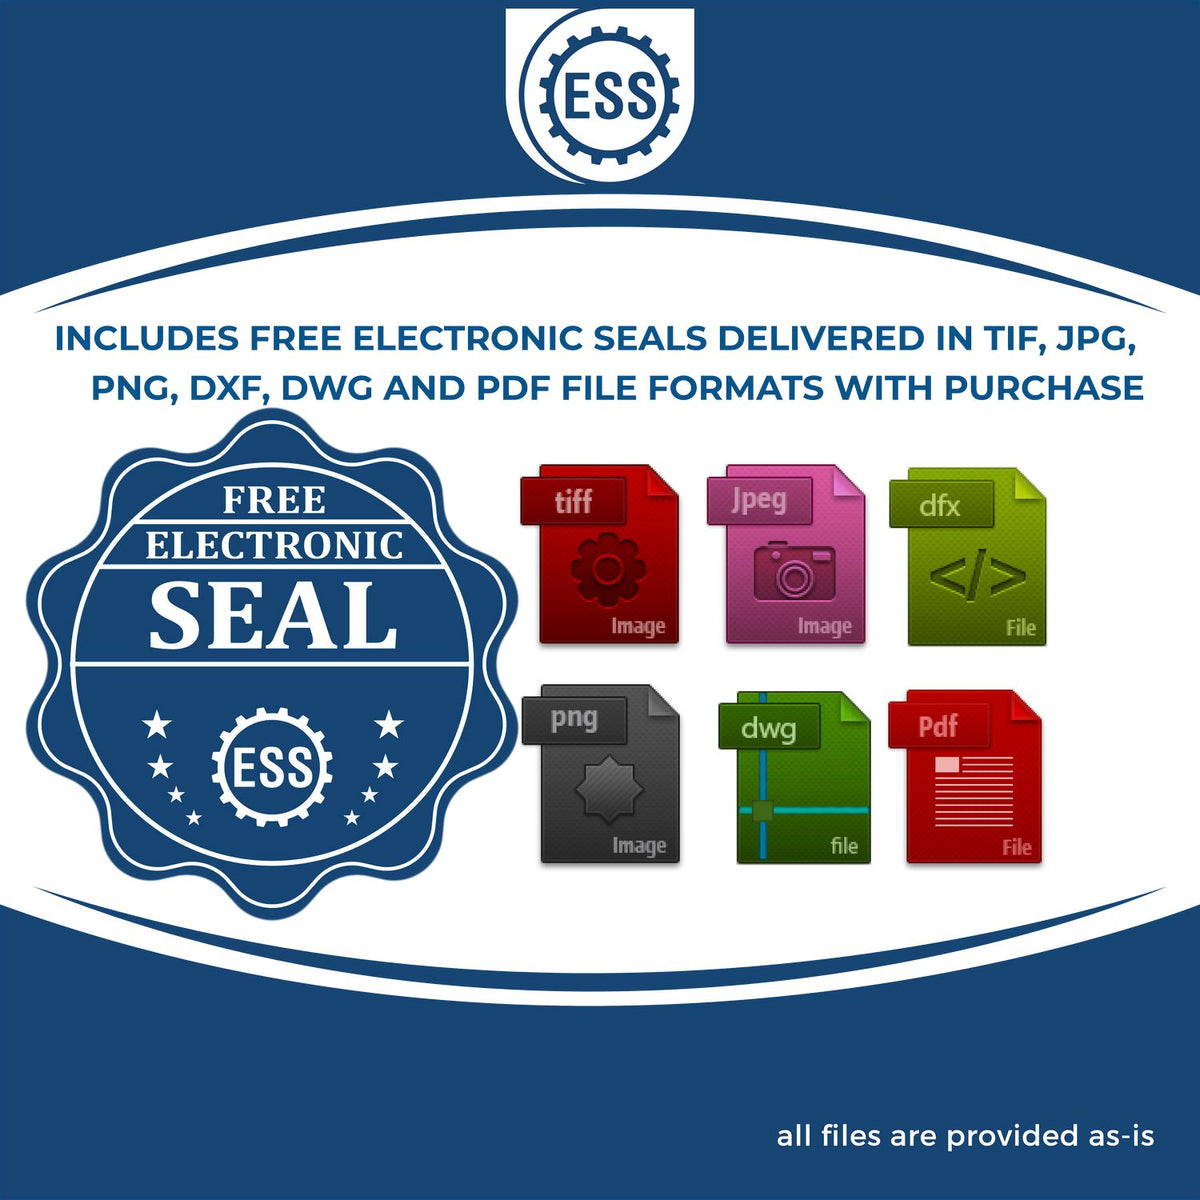 An infographic for the free electronic seal for the State of Nebraska Extended Long Reach Engineer Seal illustrating the different file type icons such as DXF, DWG, TIF, JPG and PNG.